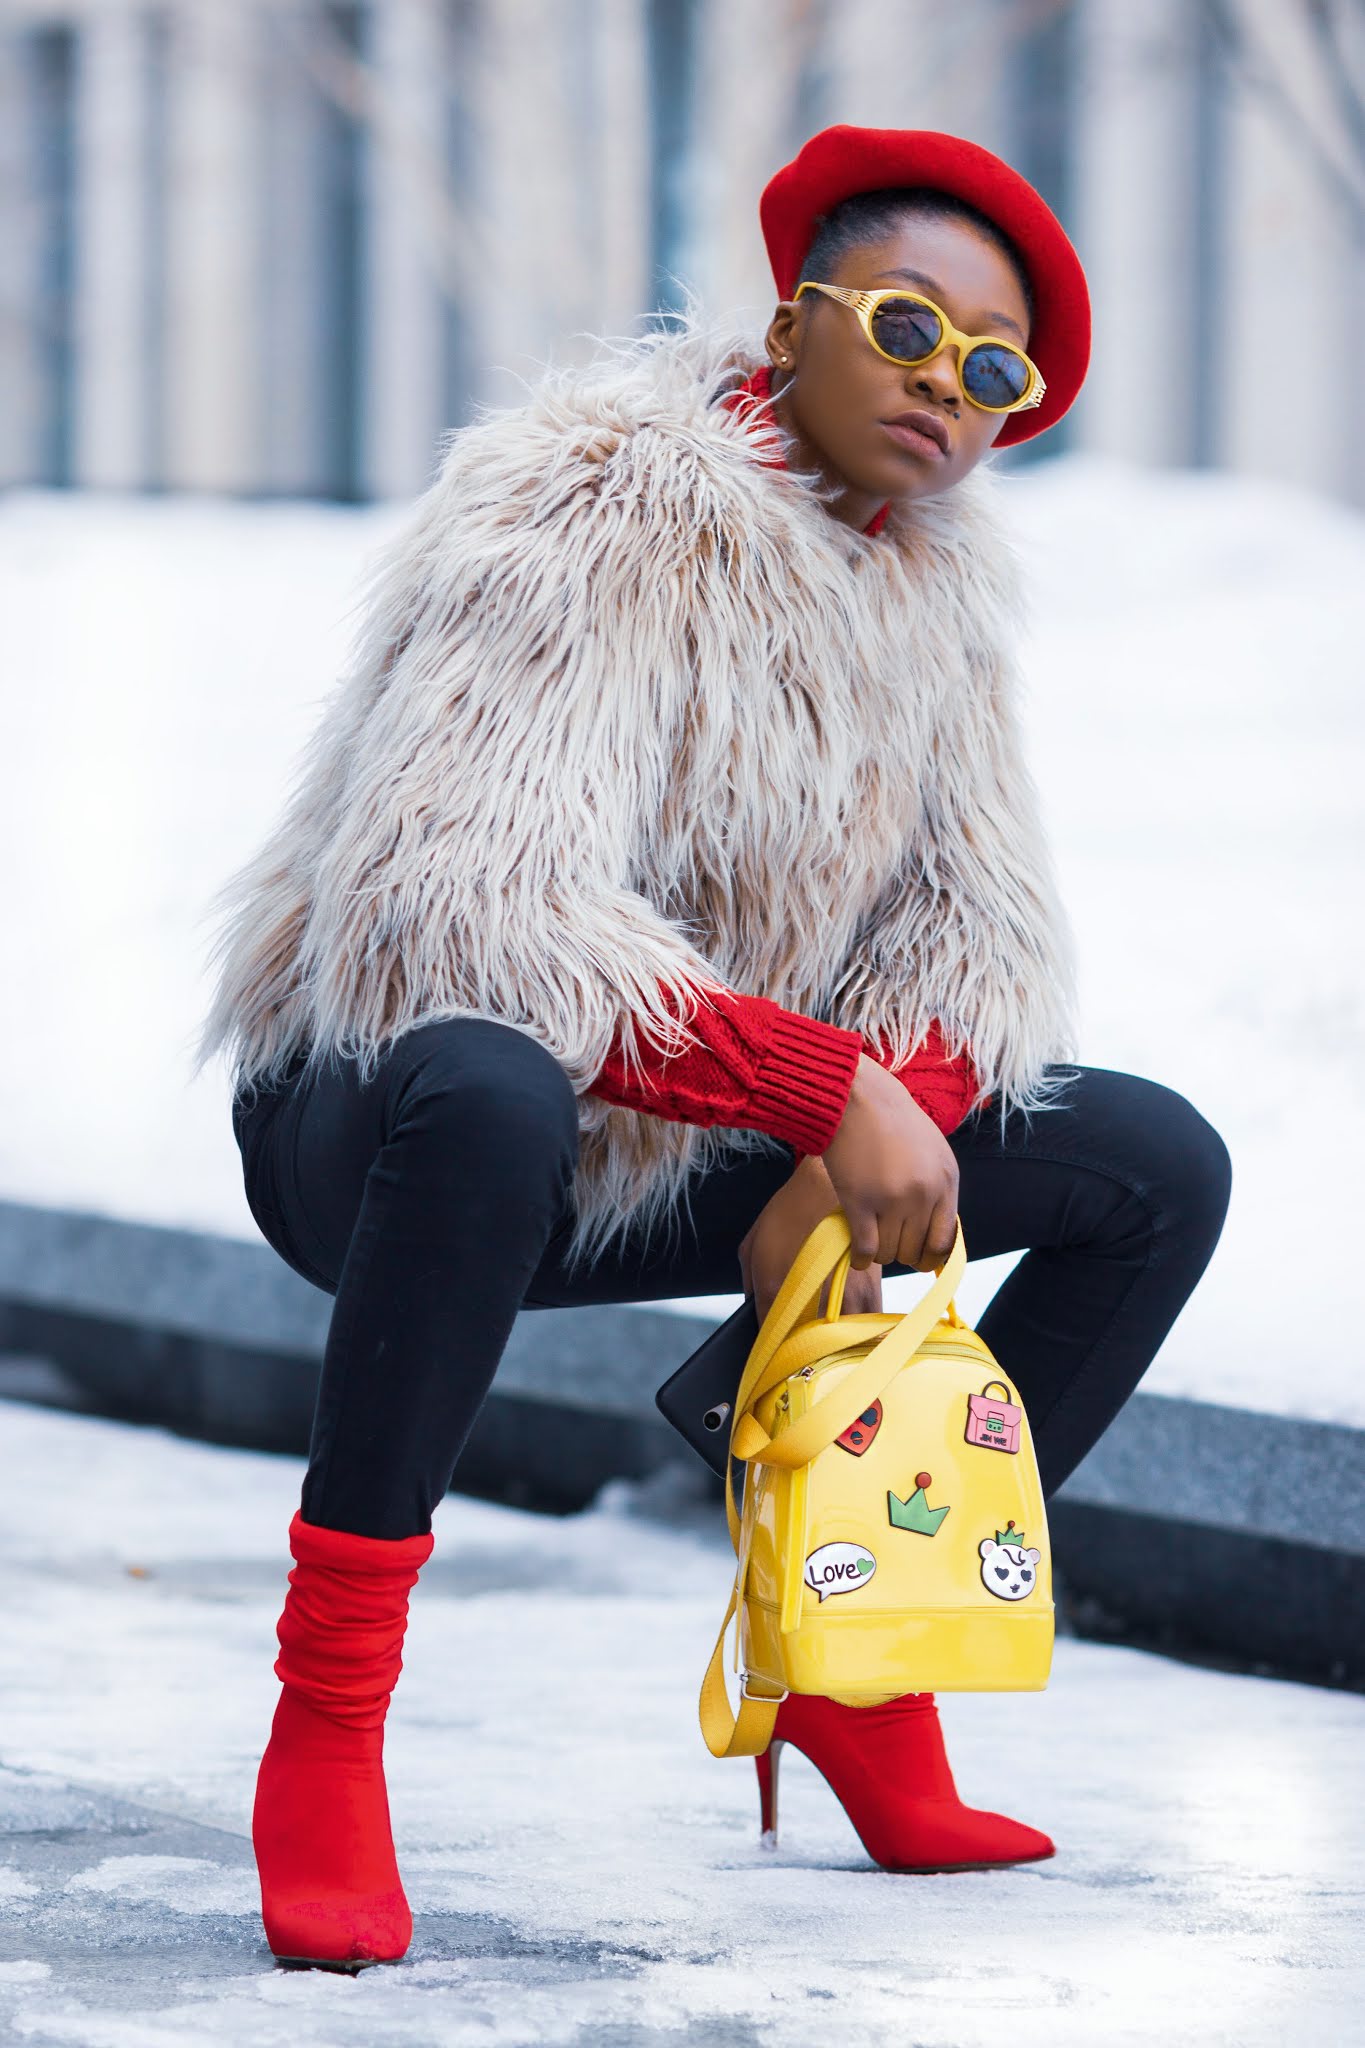 How to dress in winter to look trendy, fashionable and stylish